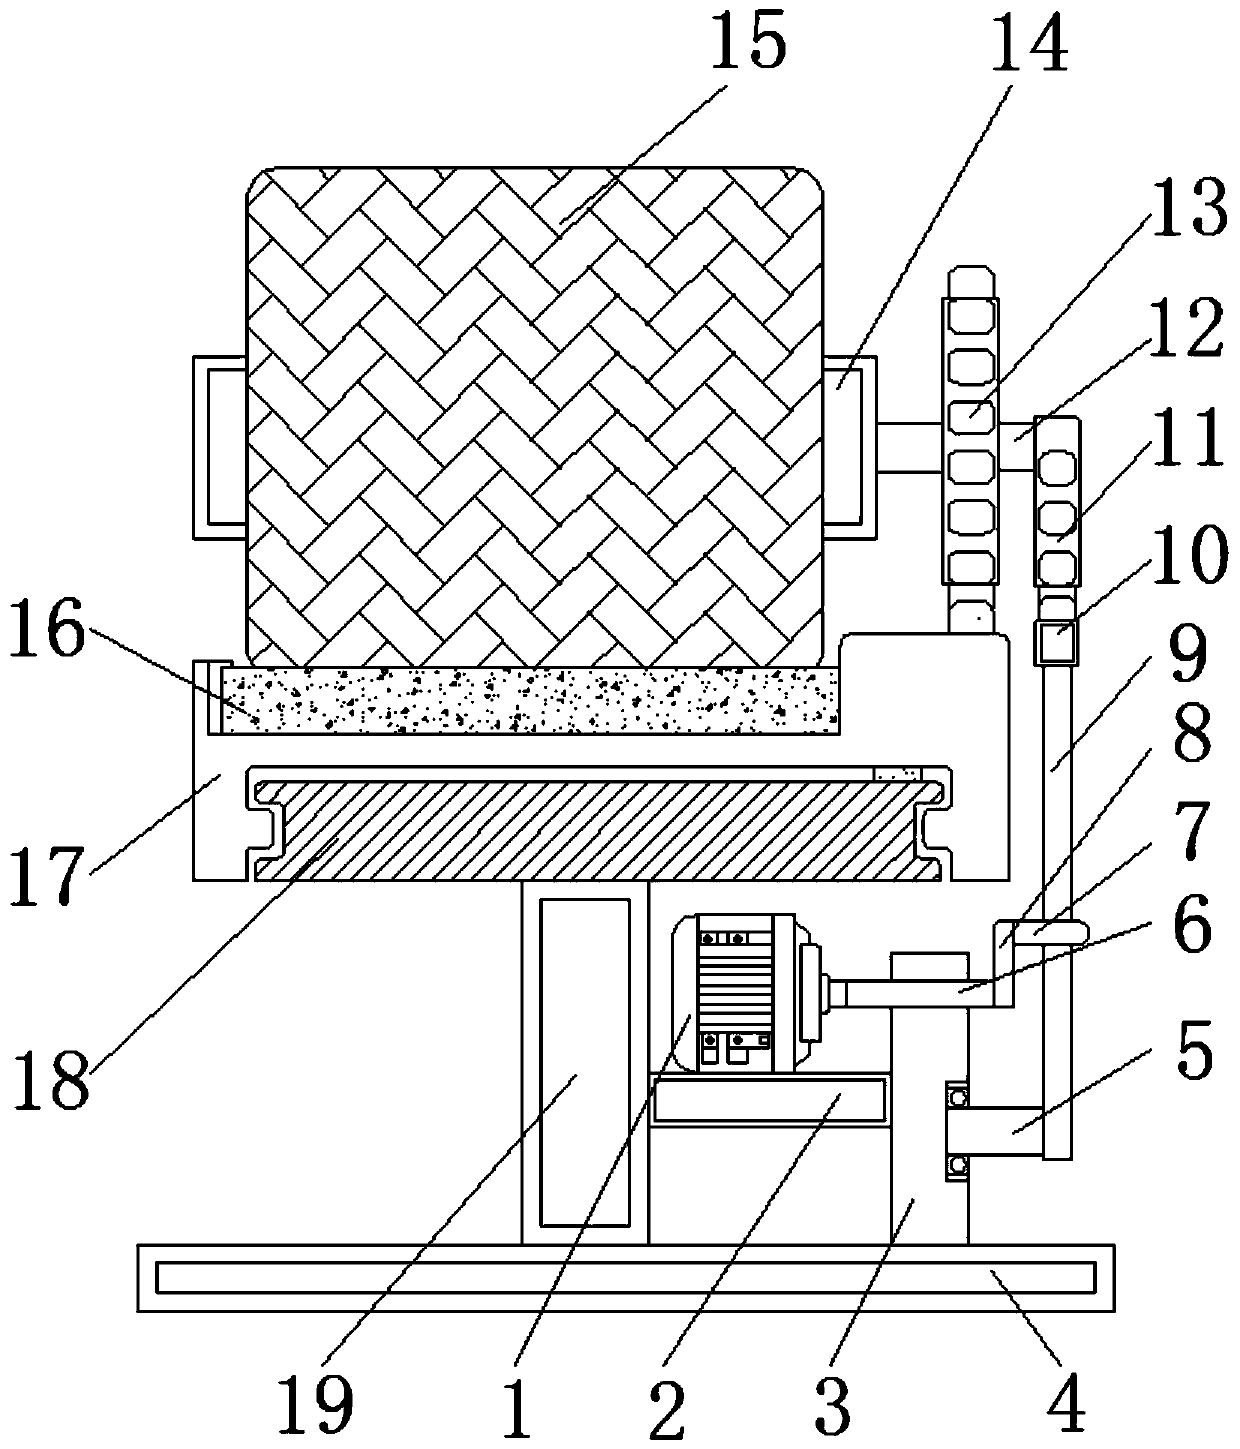 Even-grinding organic fireproof blocking material grinding device